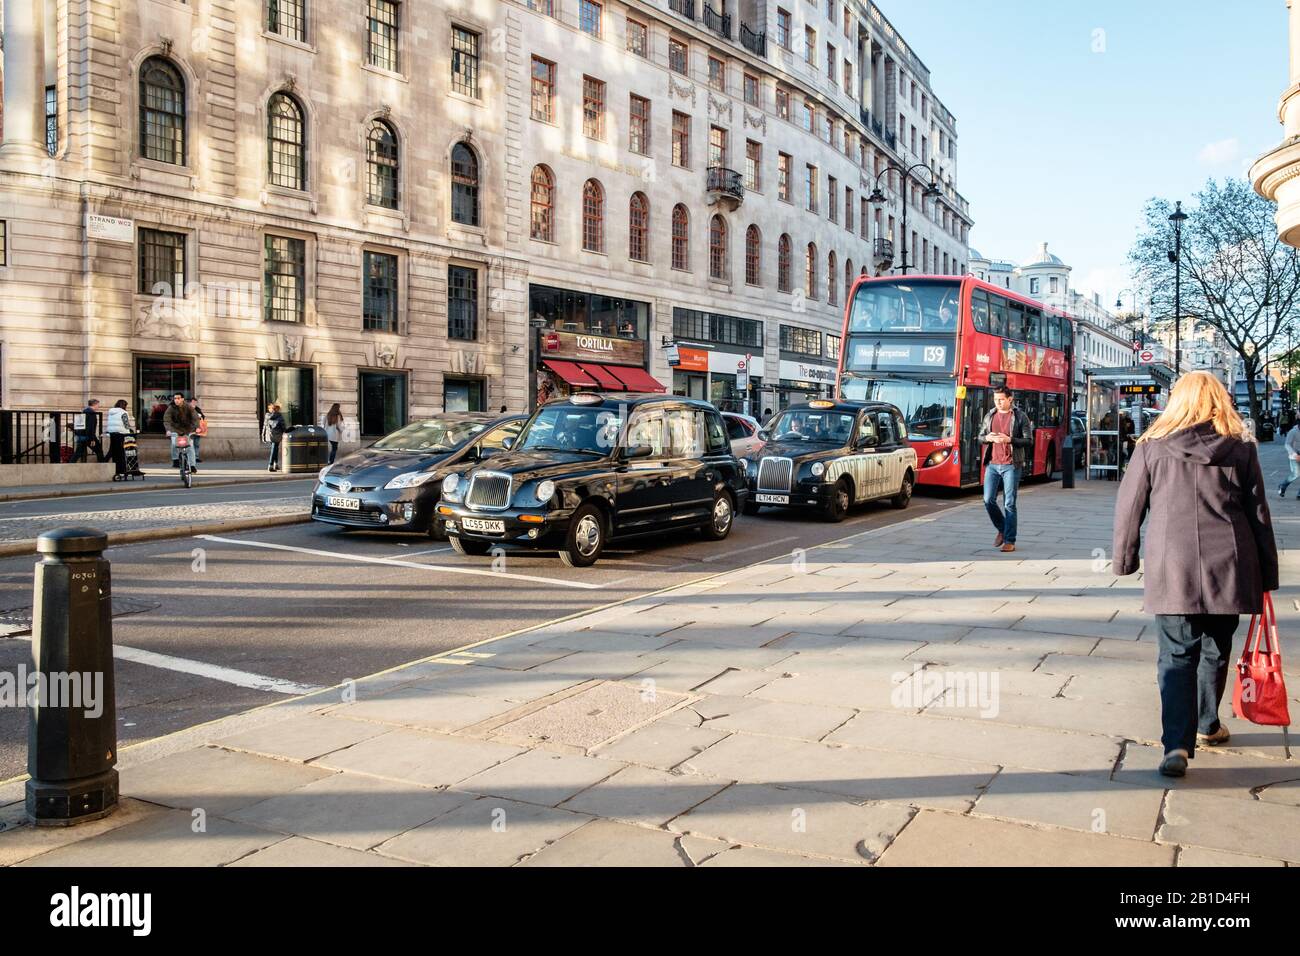 Traffic stopped at signal near Covent Garden intersection, London, England Stock Photo